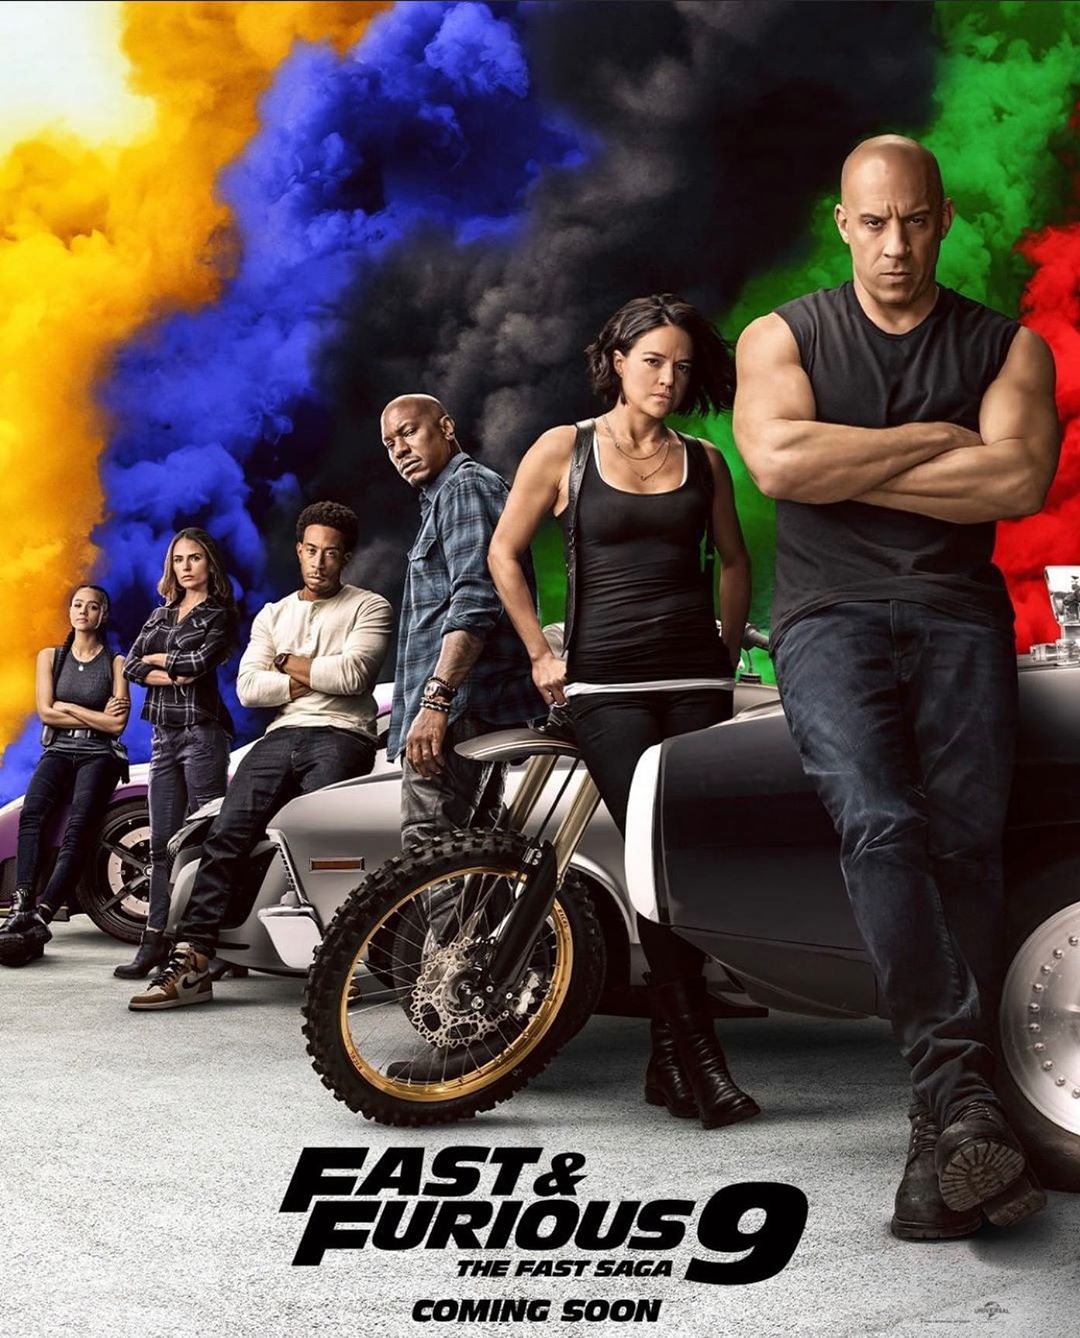 Fast and furious 9 full movie download in hindi